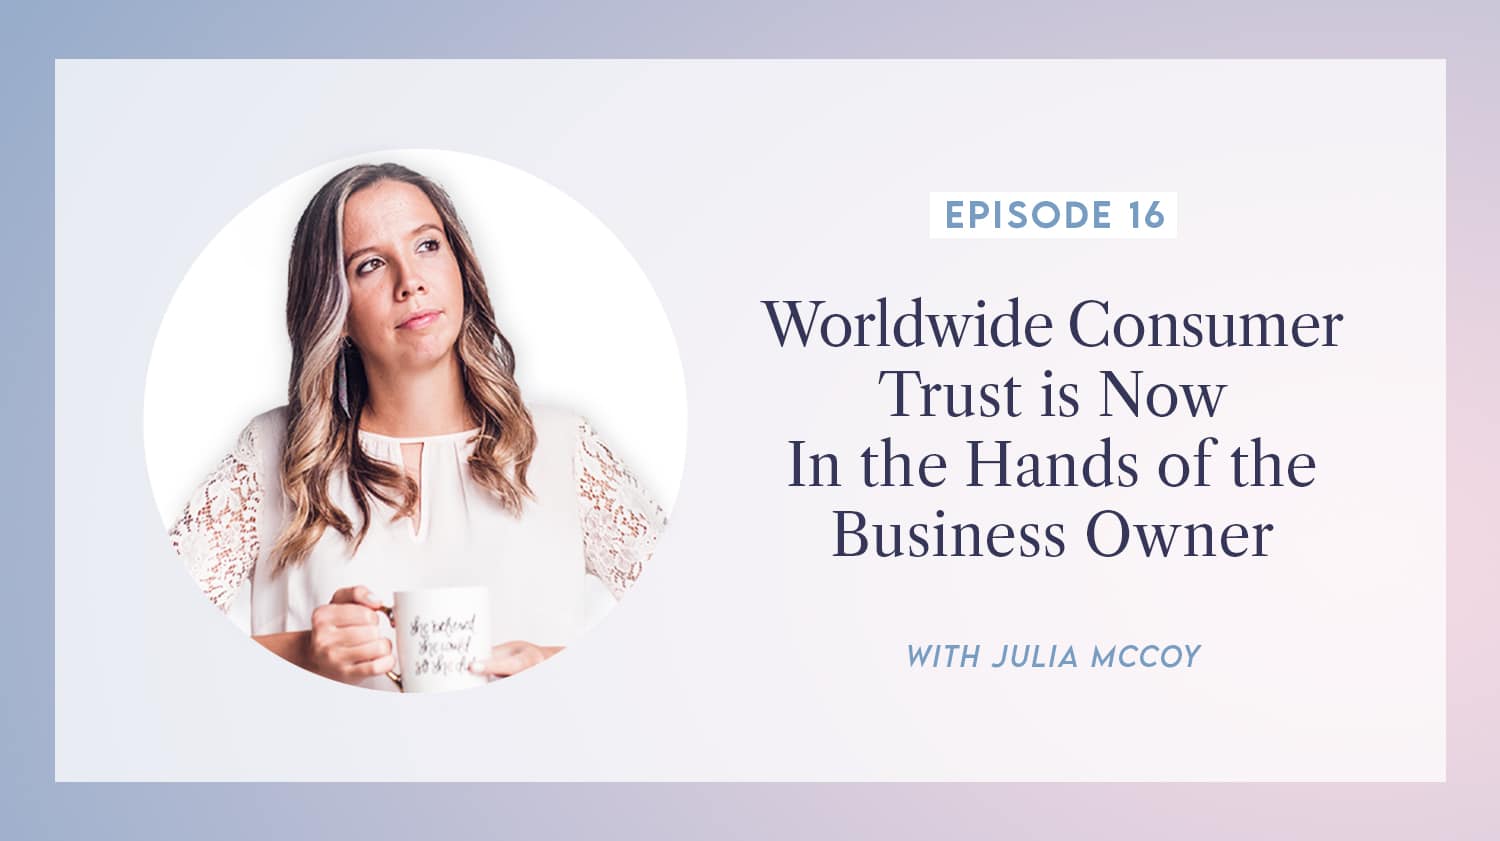 content transformation podcast with julia mccoy episode 16 worldwide consumer trust is now in the hands of the business owner